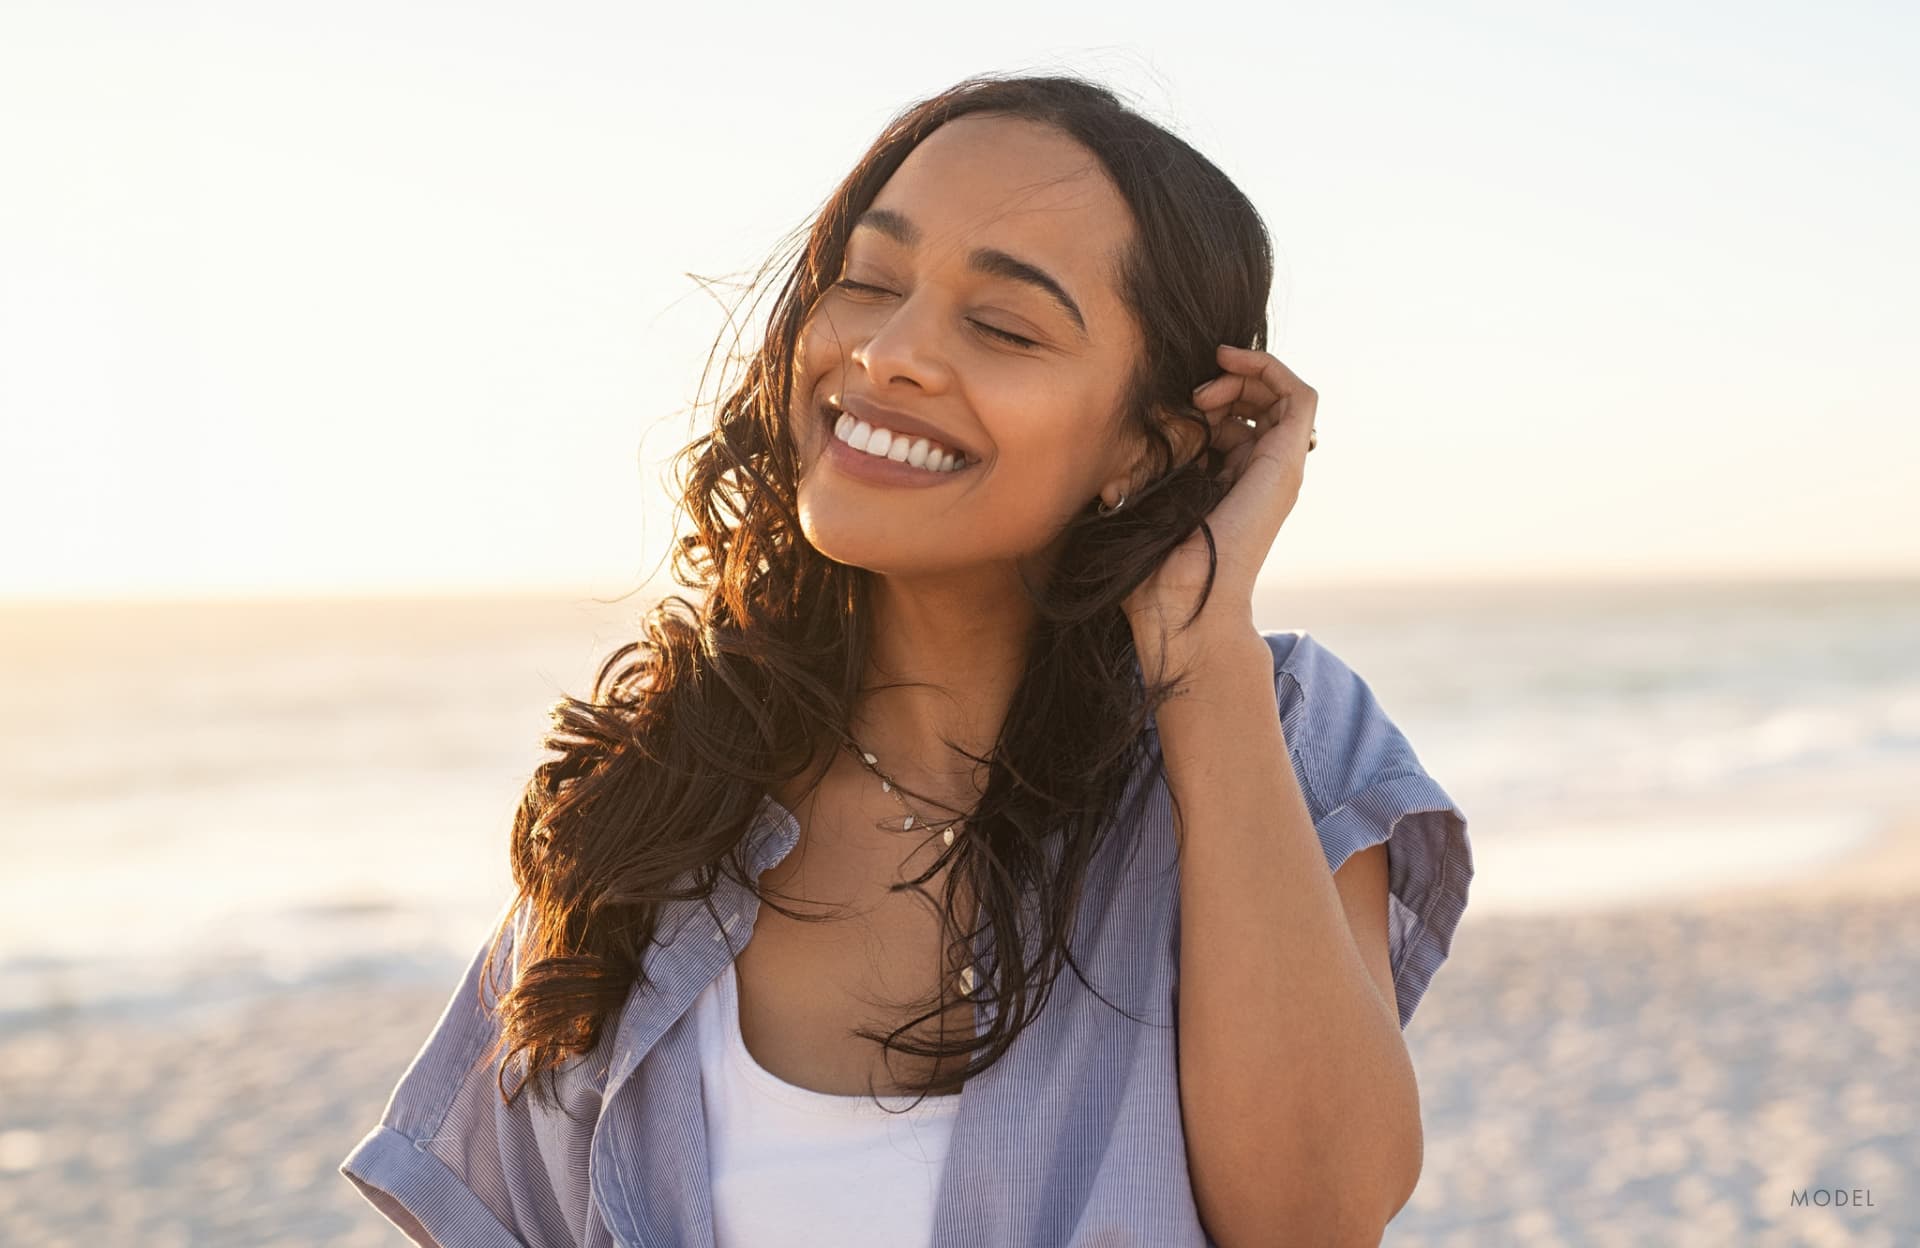 A model image of a woman smiling with her eyes closed while standing on the beach.